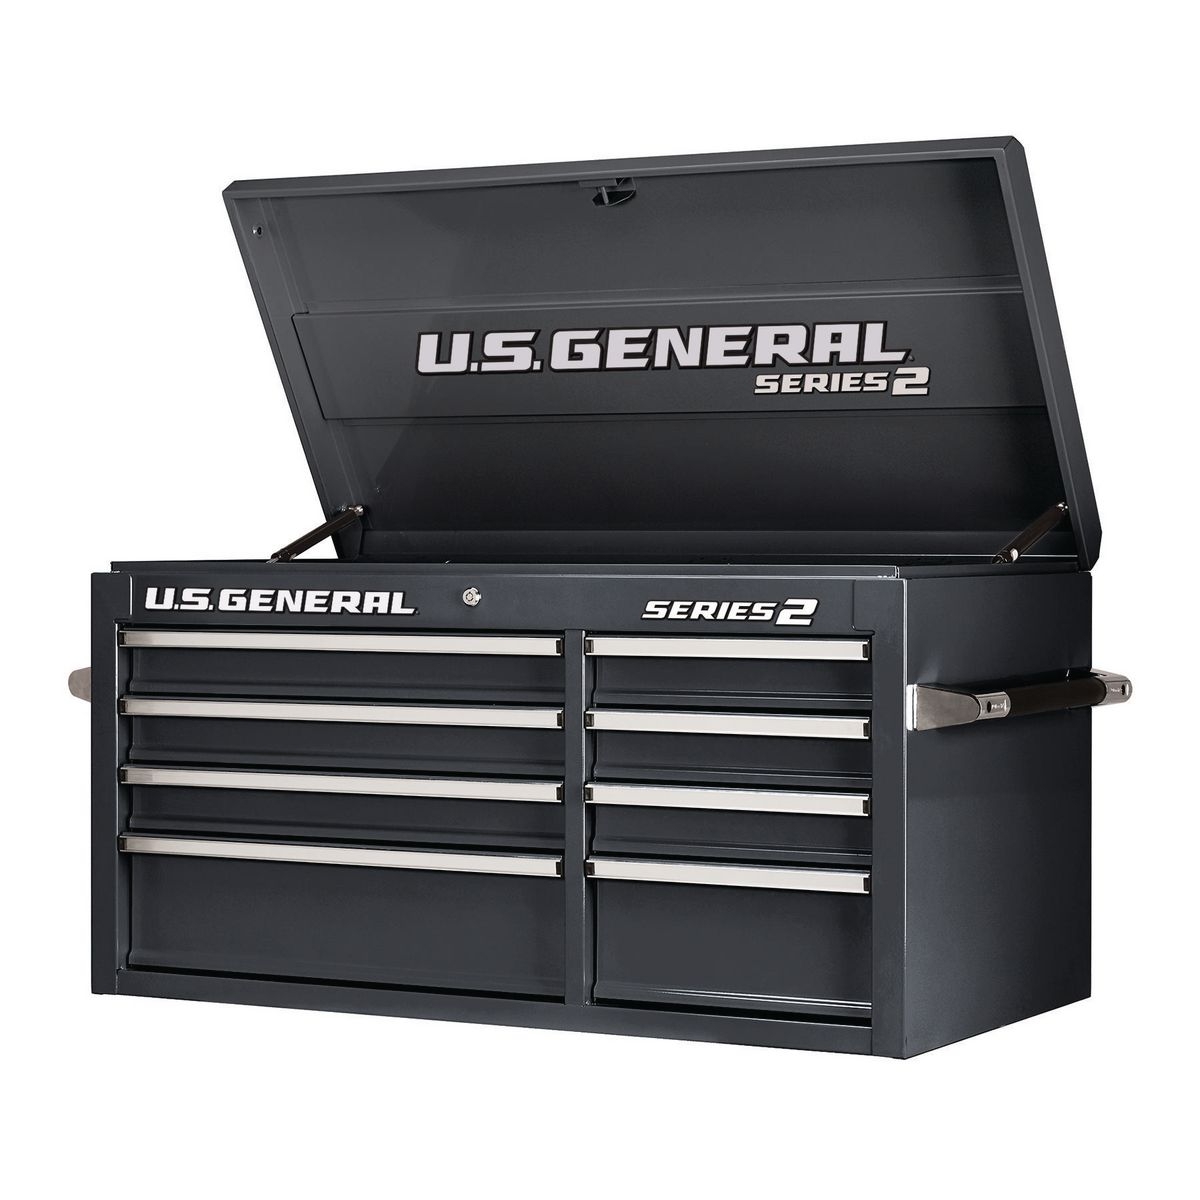 U.S. GENERAL 44 in. Double Bank Black Top Chest – Item 64437 / 64435